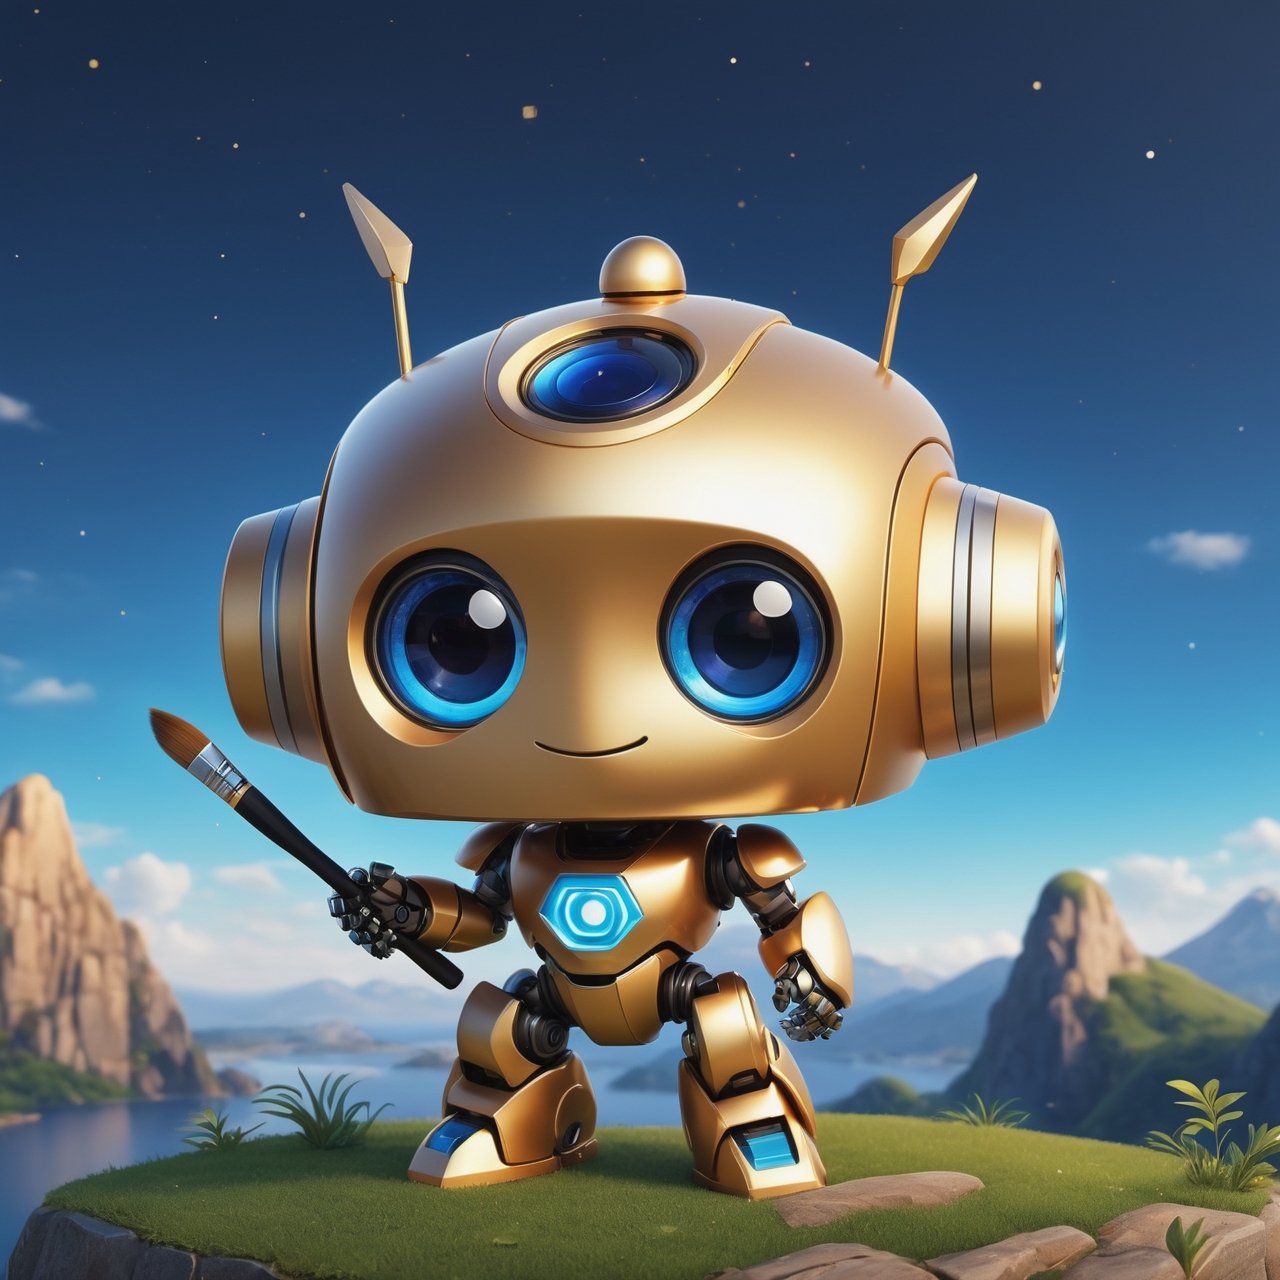 (masterpiece:1.2, highest quality), (realistic, photo_realistic:1.9)
1chibi_robot, Cute chibi robot, happy face, Designer look holding a paintbrush in one hand, white with blue, (detailed background), (gradients), colorful, detailed landscape, visual key, shiny skin. Modern place, Action camera. Portrait film. Standard lens. Golden hour lighting.
sharp focus, 8k, UHD, high quality, frowning, intricate detailed, highly detailed, hyper-realistic,interior,robot Chibi,chibi emote style,Monster